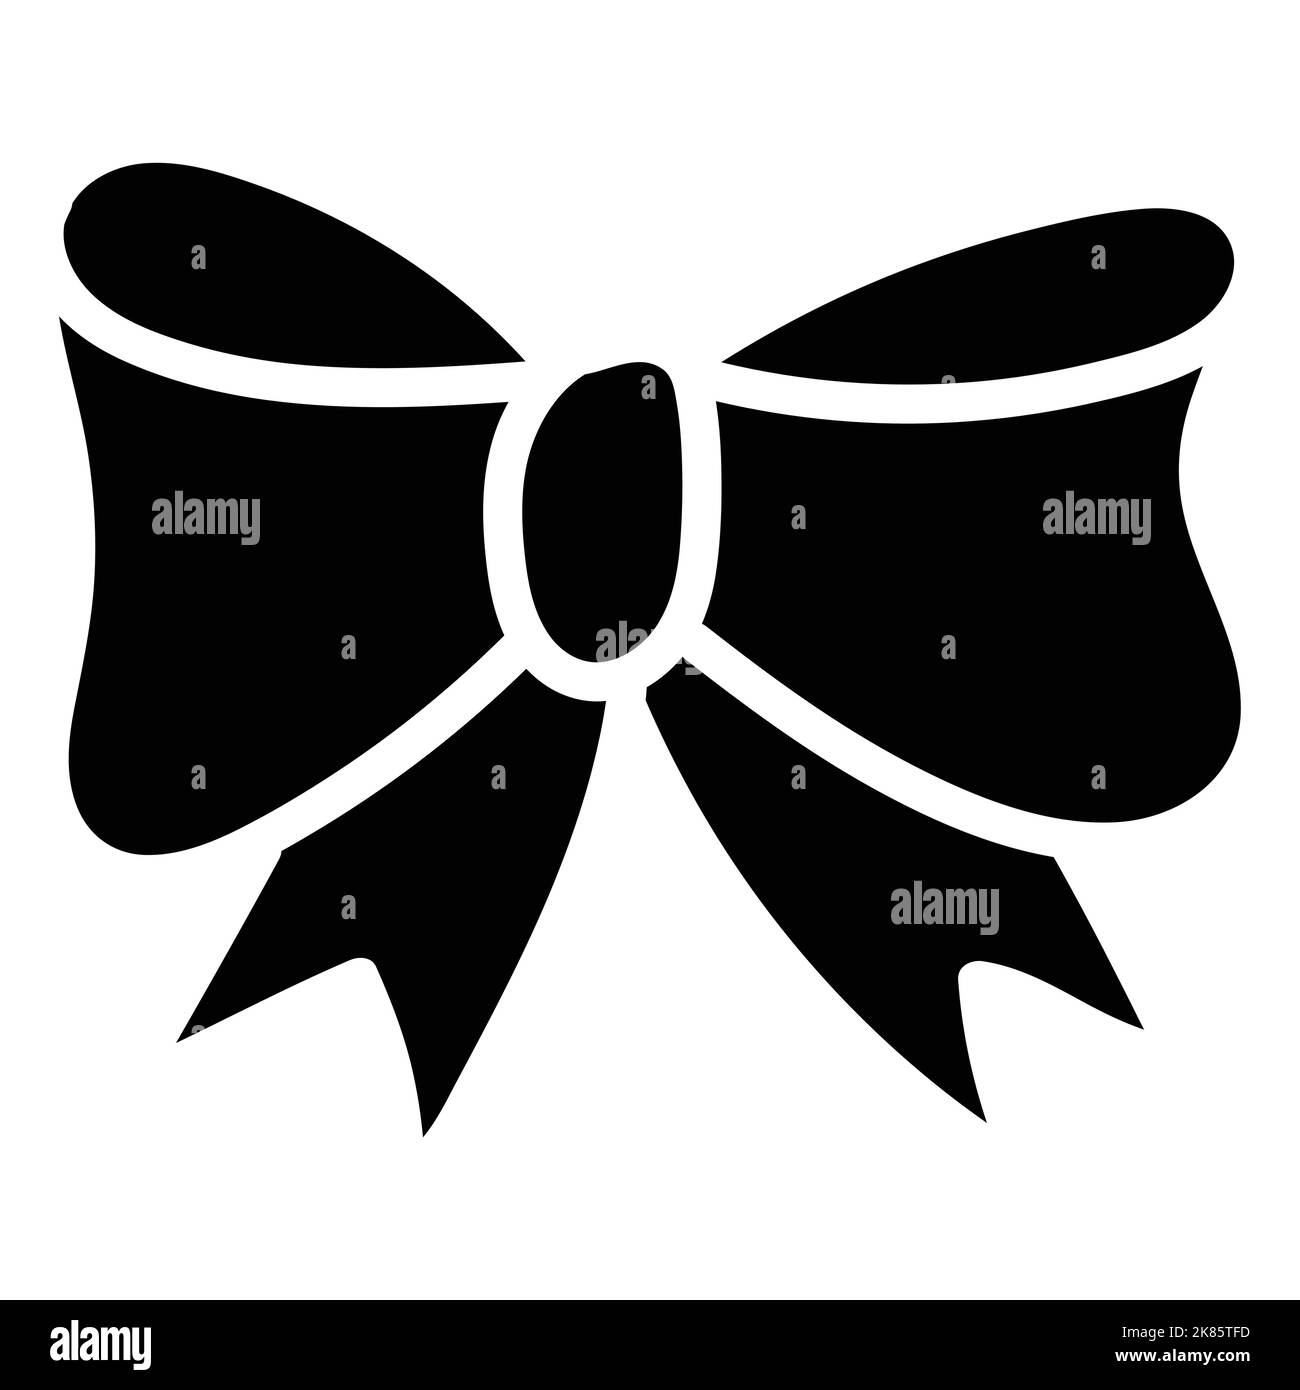 Isolated Decorative Bow Vector Illustration Stock Vector